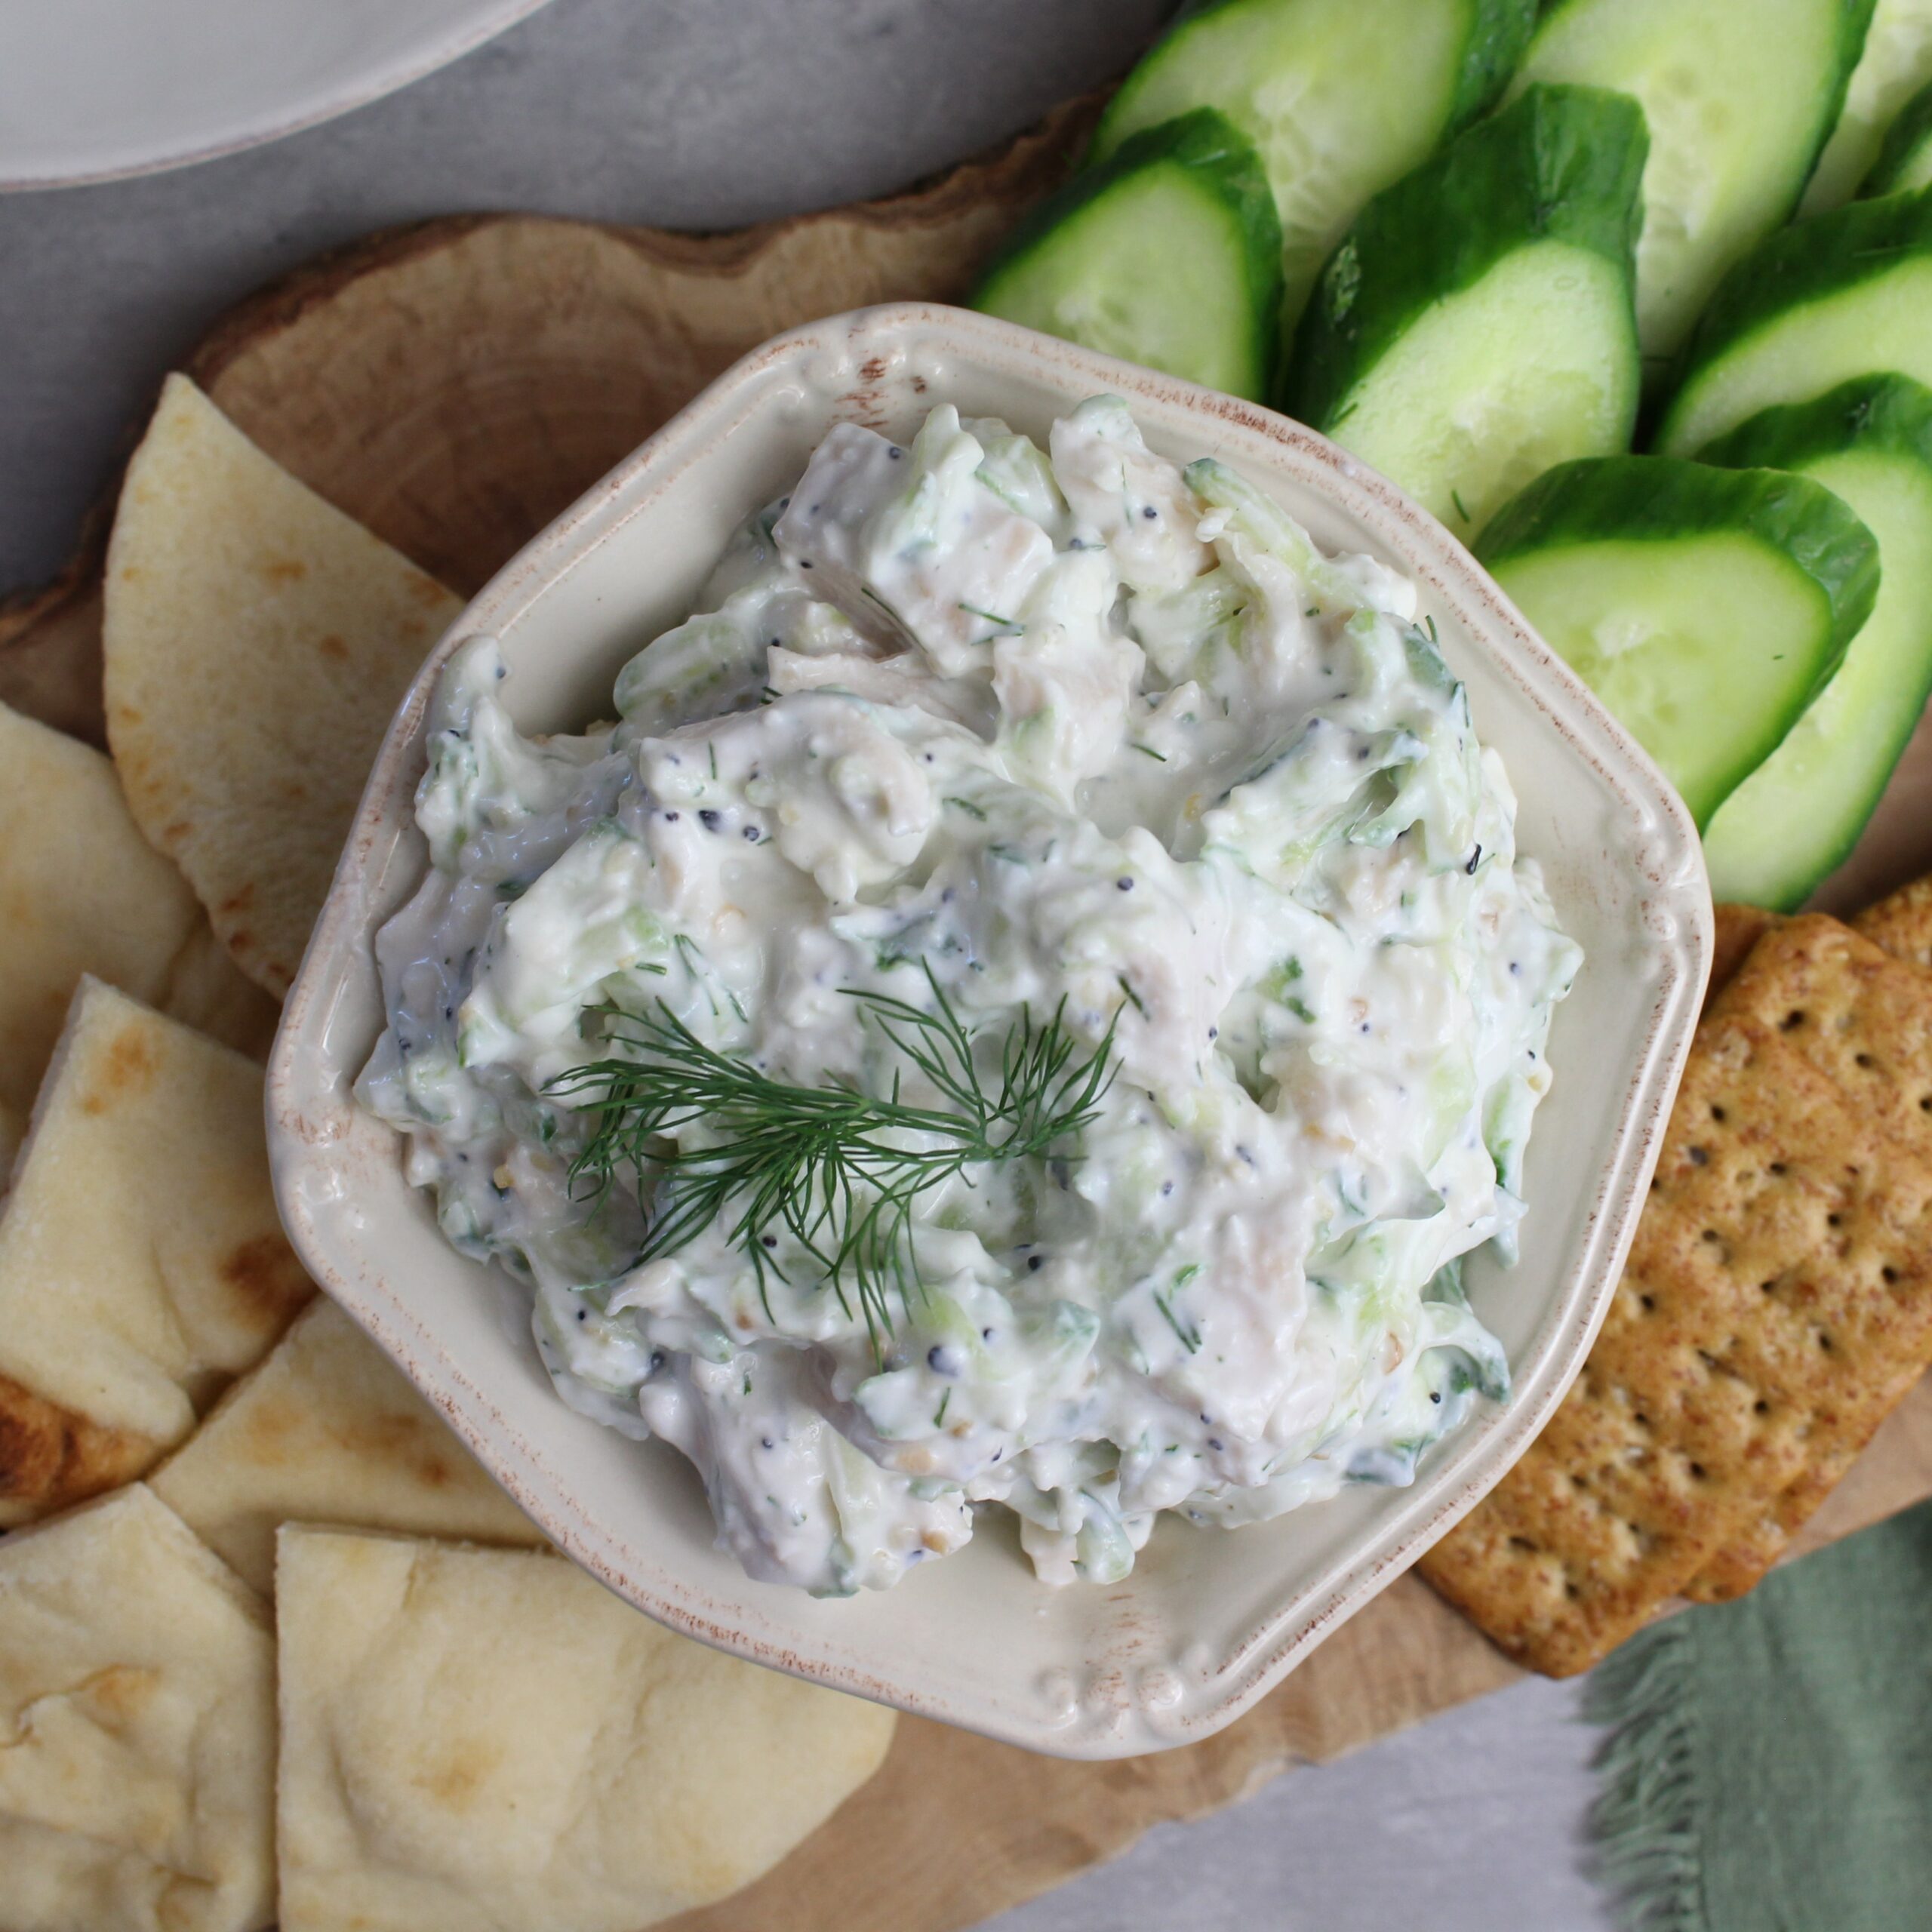 Chicken salad with tzatziki served with cucumbers, pita, and crackers.